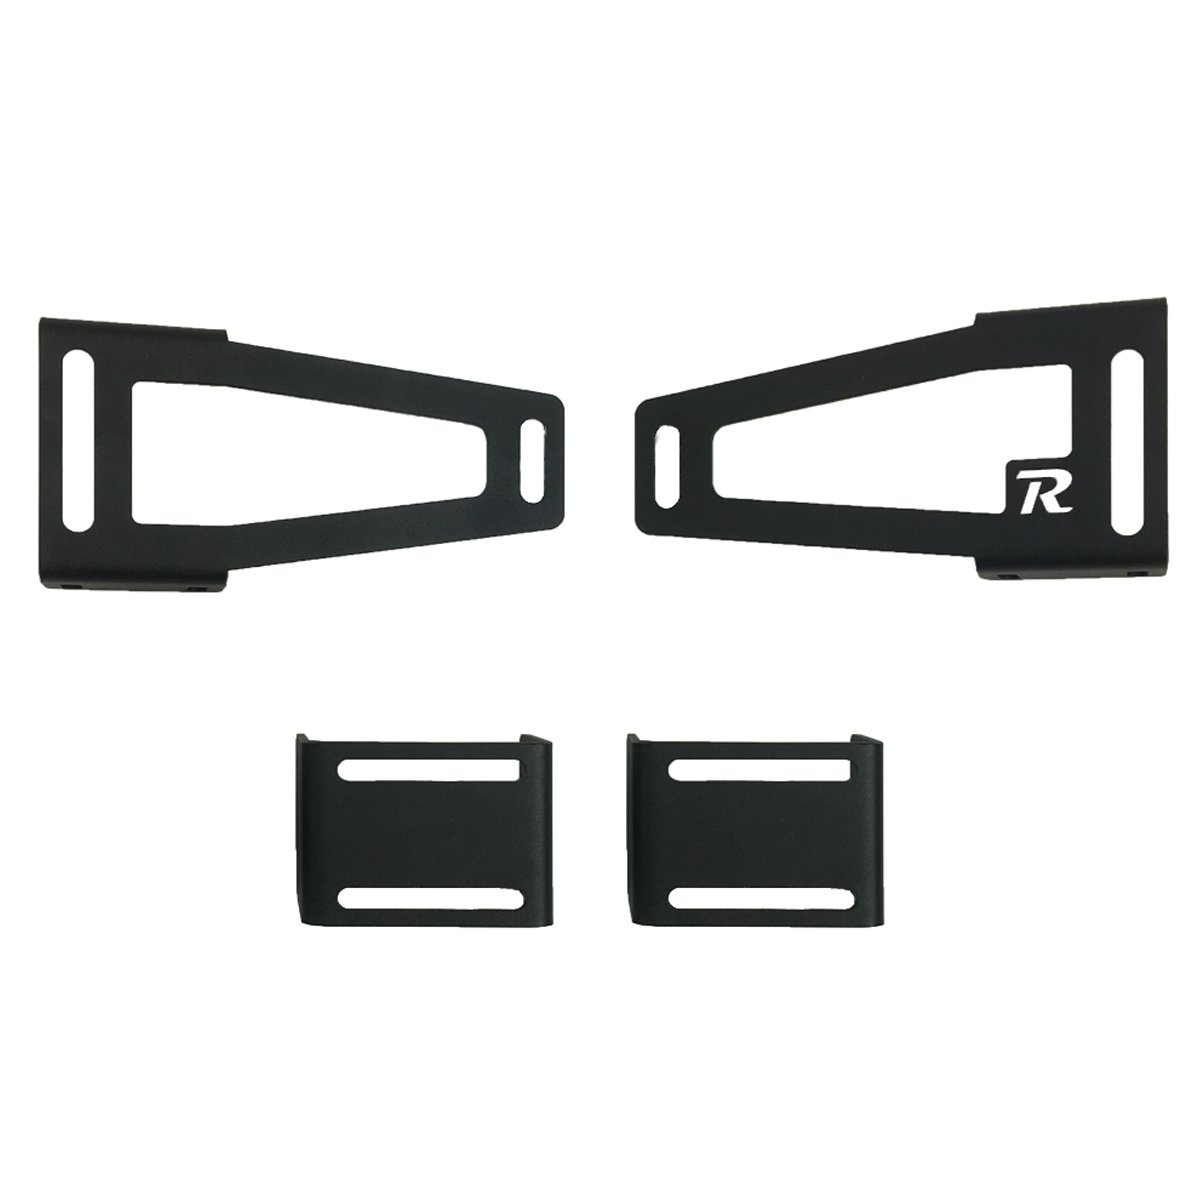 Rago 4RUNNER CANOPY/ AWNING MOUNTS FOR FACTORY ROOF RAIL (ships free) - Click Image to Close